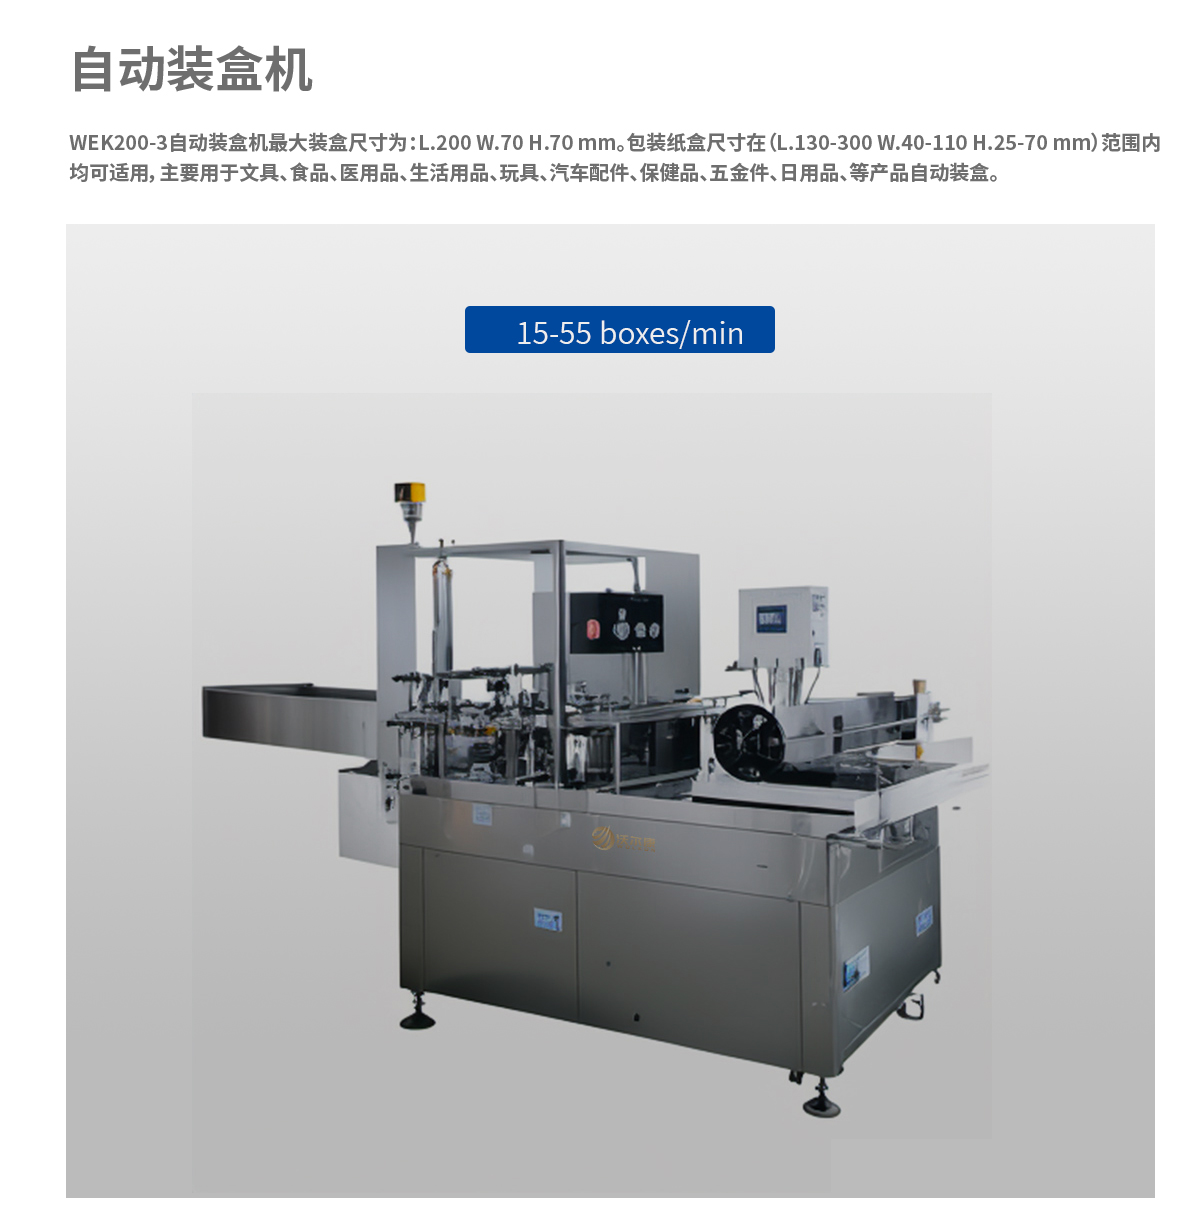 Explore the automatic facial mask cartoning machine: an efficient and accurate cosmetic packaging tool title=